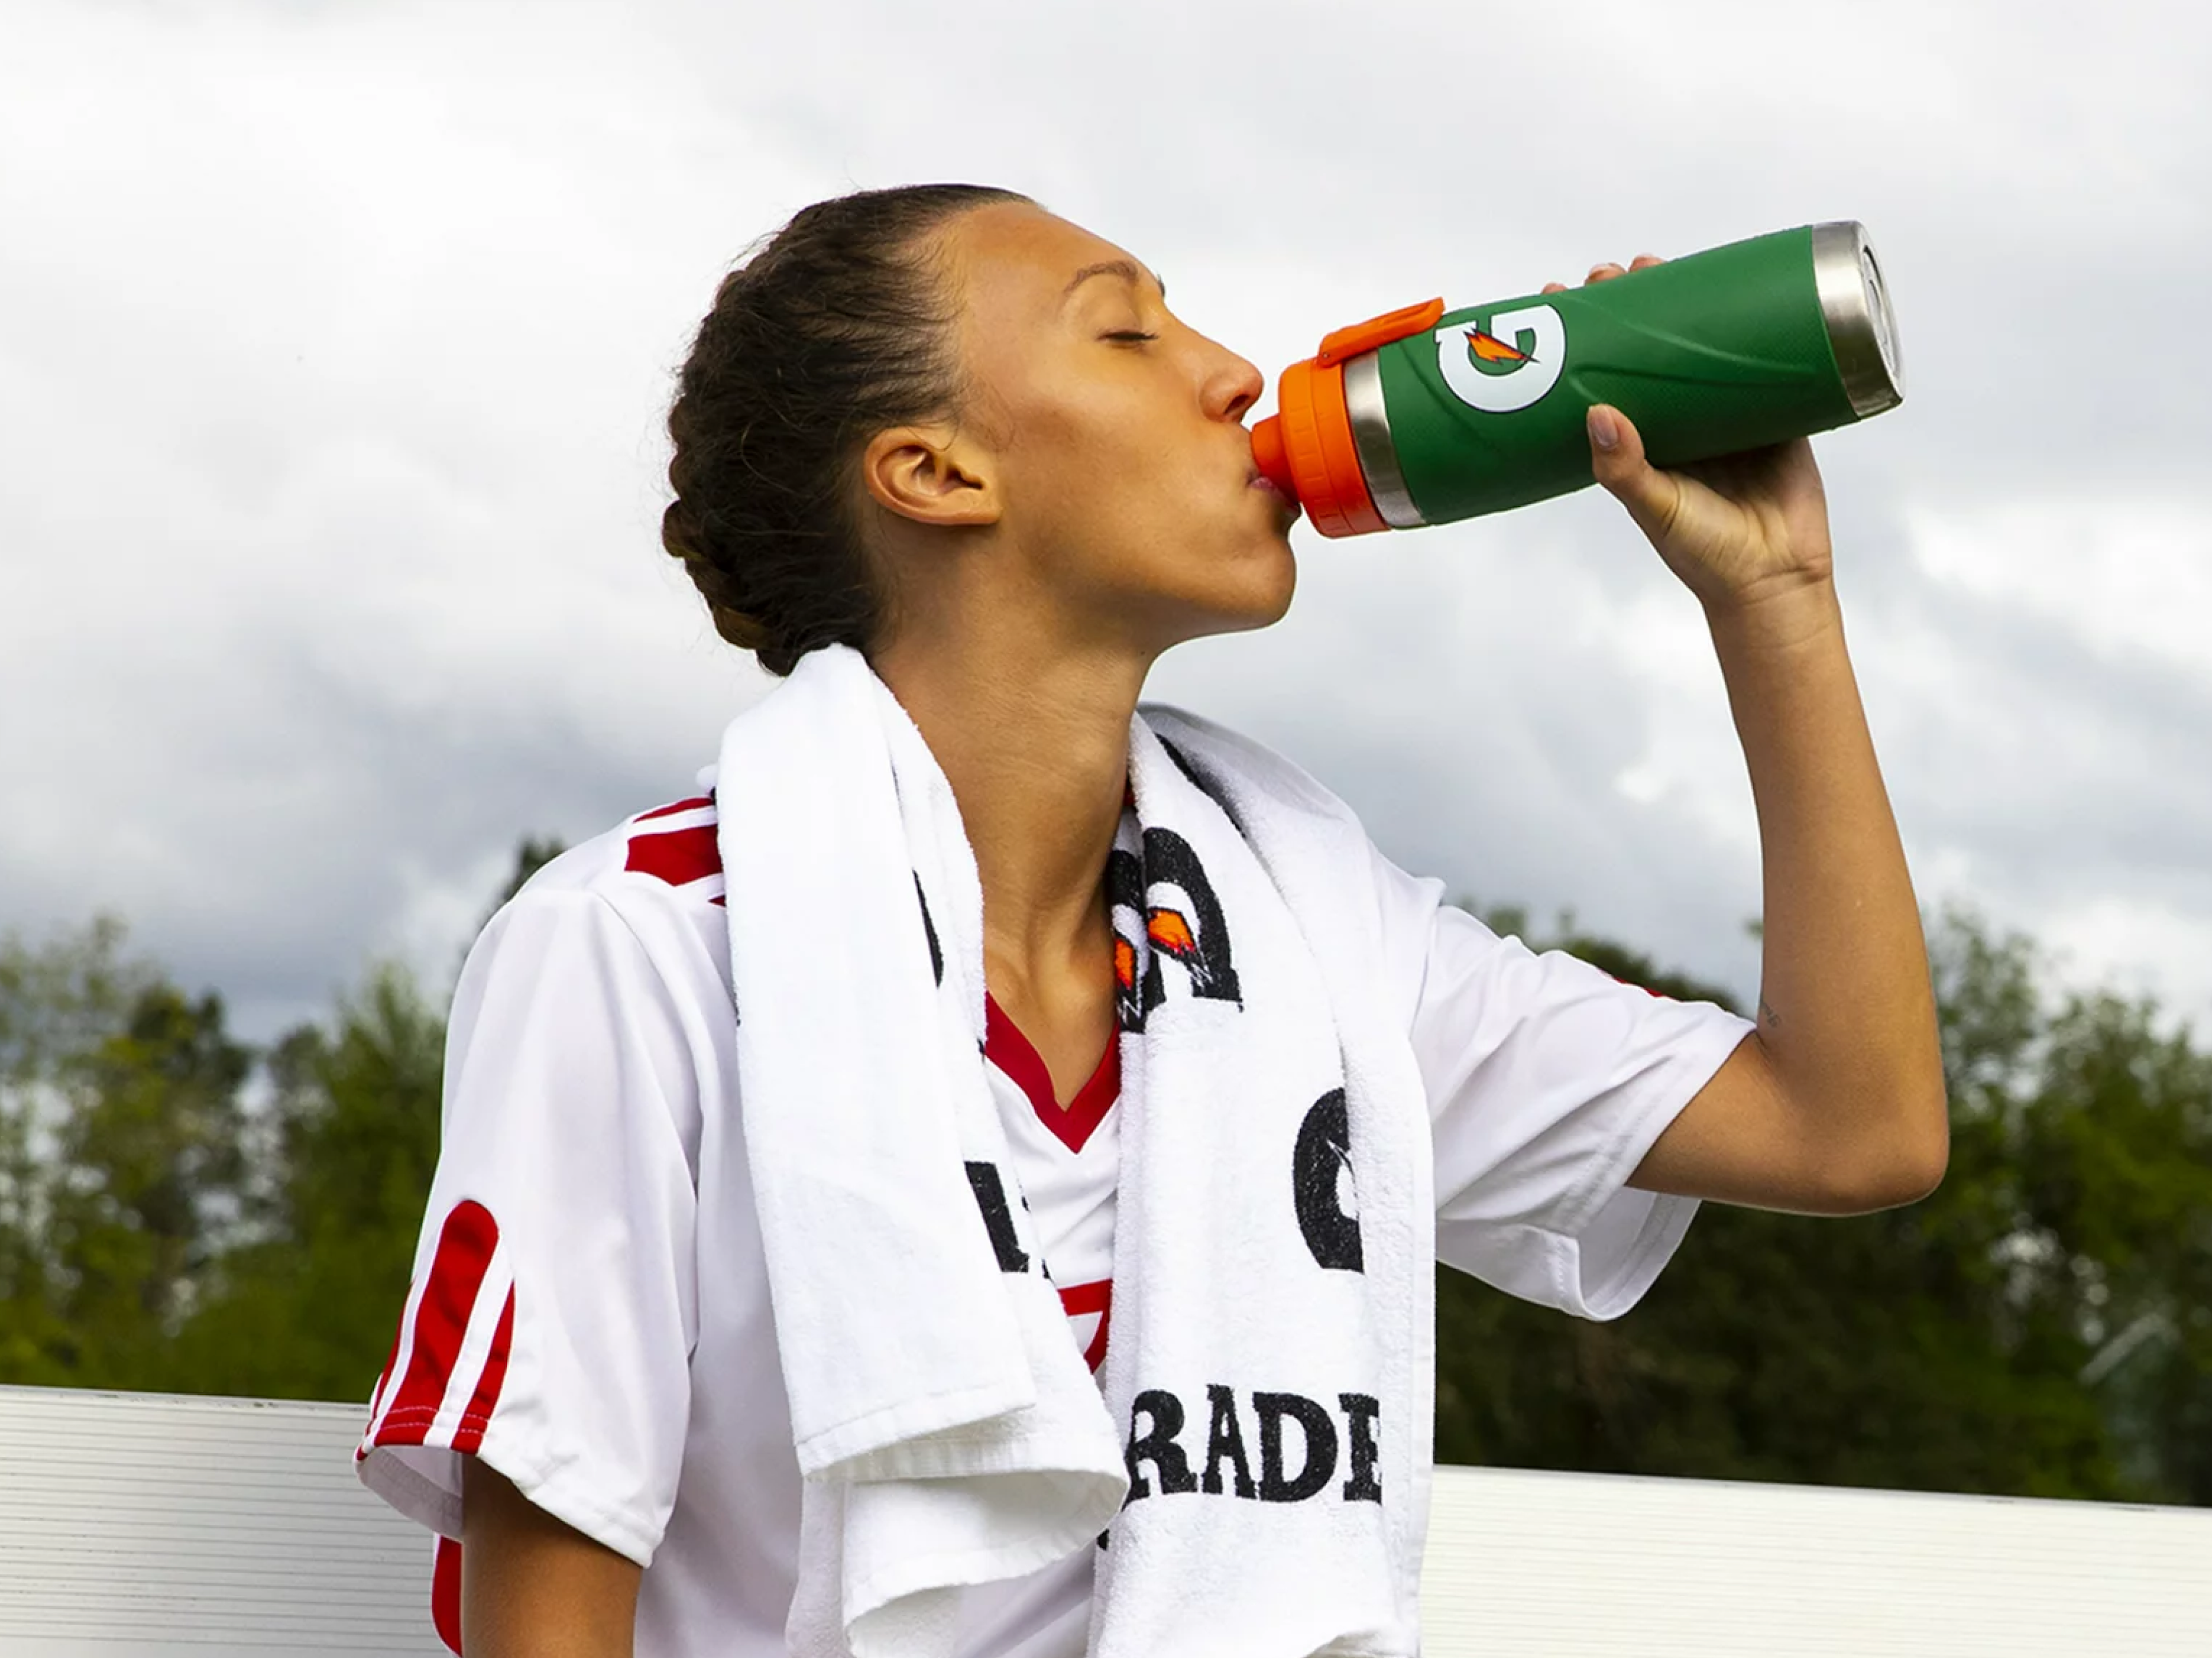 Athlete drinking out of a Gatorade Stainless Steel bottle